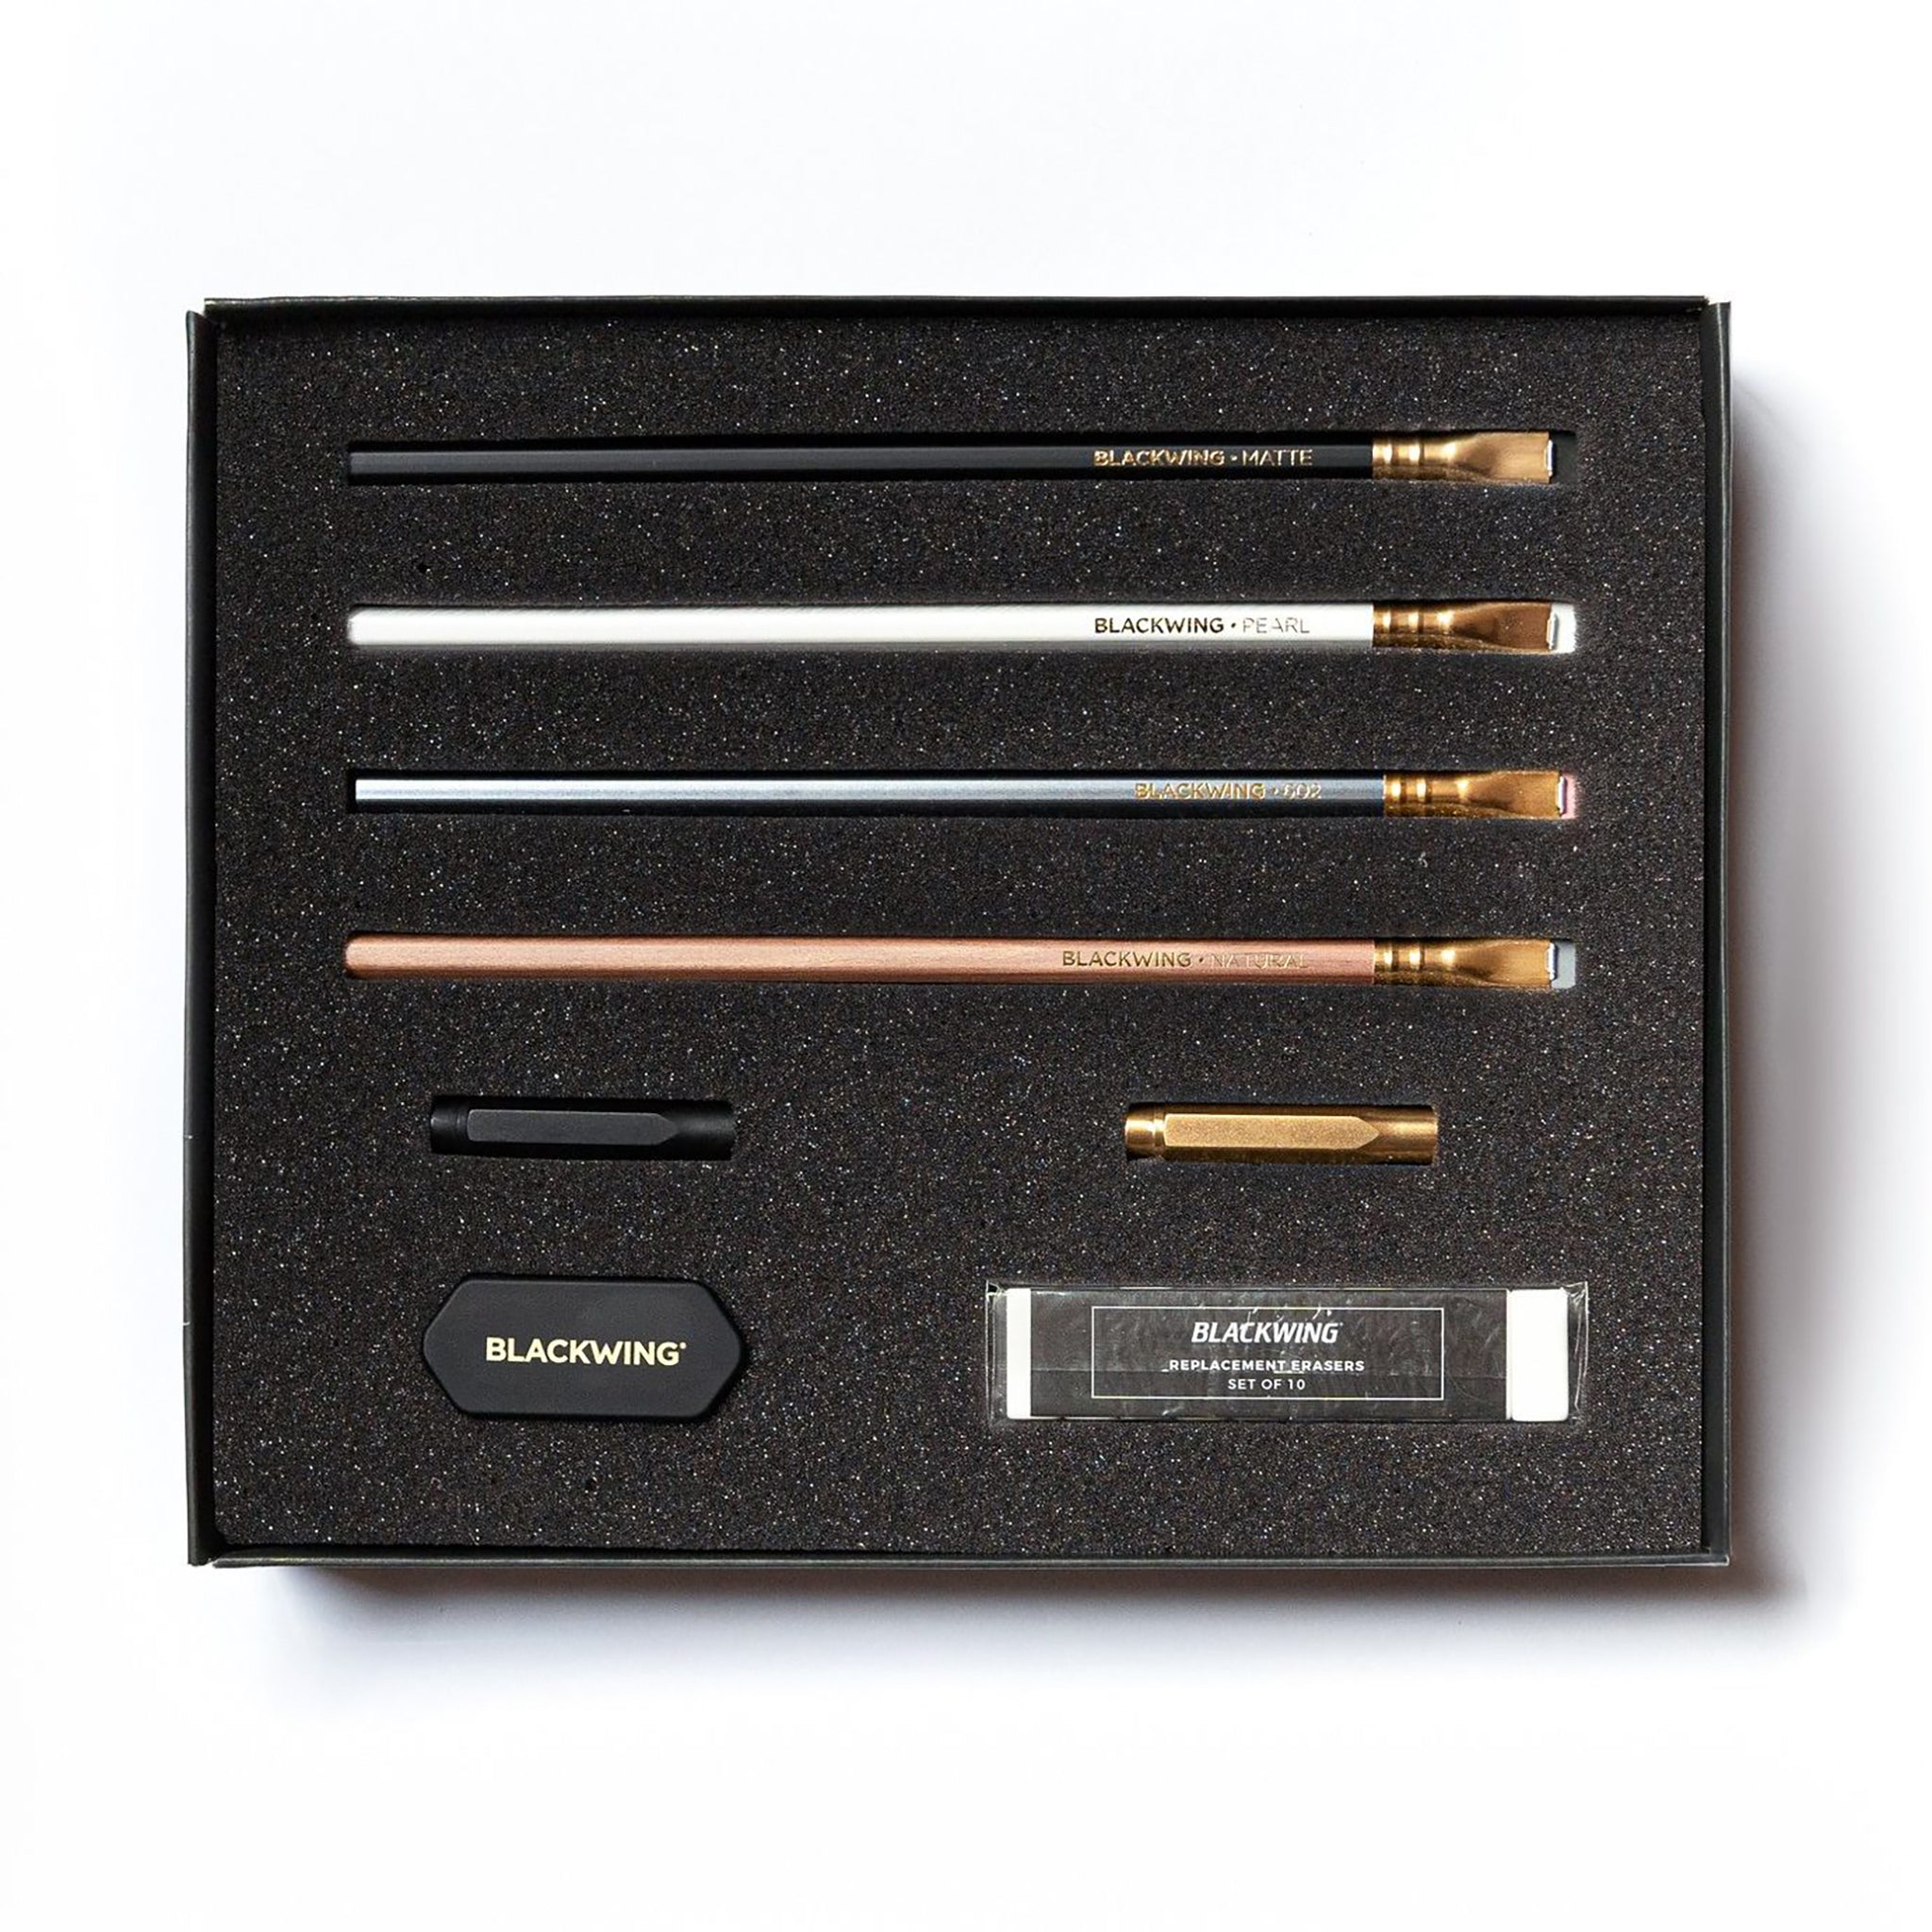 Mini Sketch Pencils – Tagged pencil – Turned Write Handcrafted Art